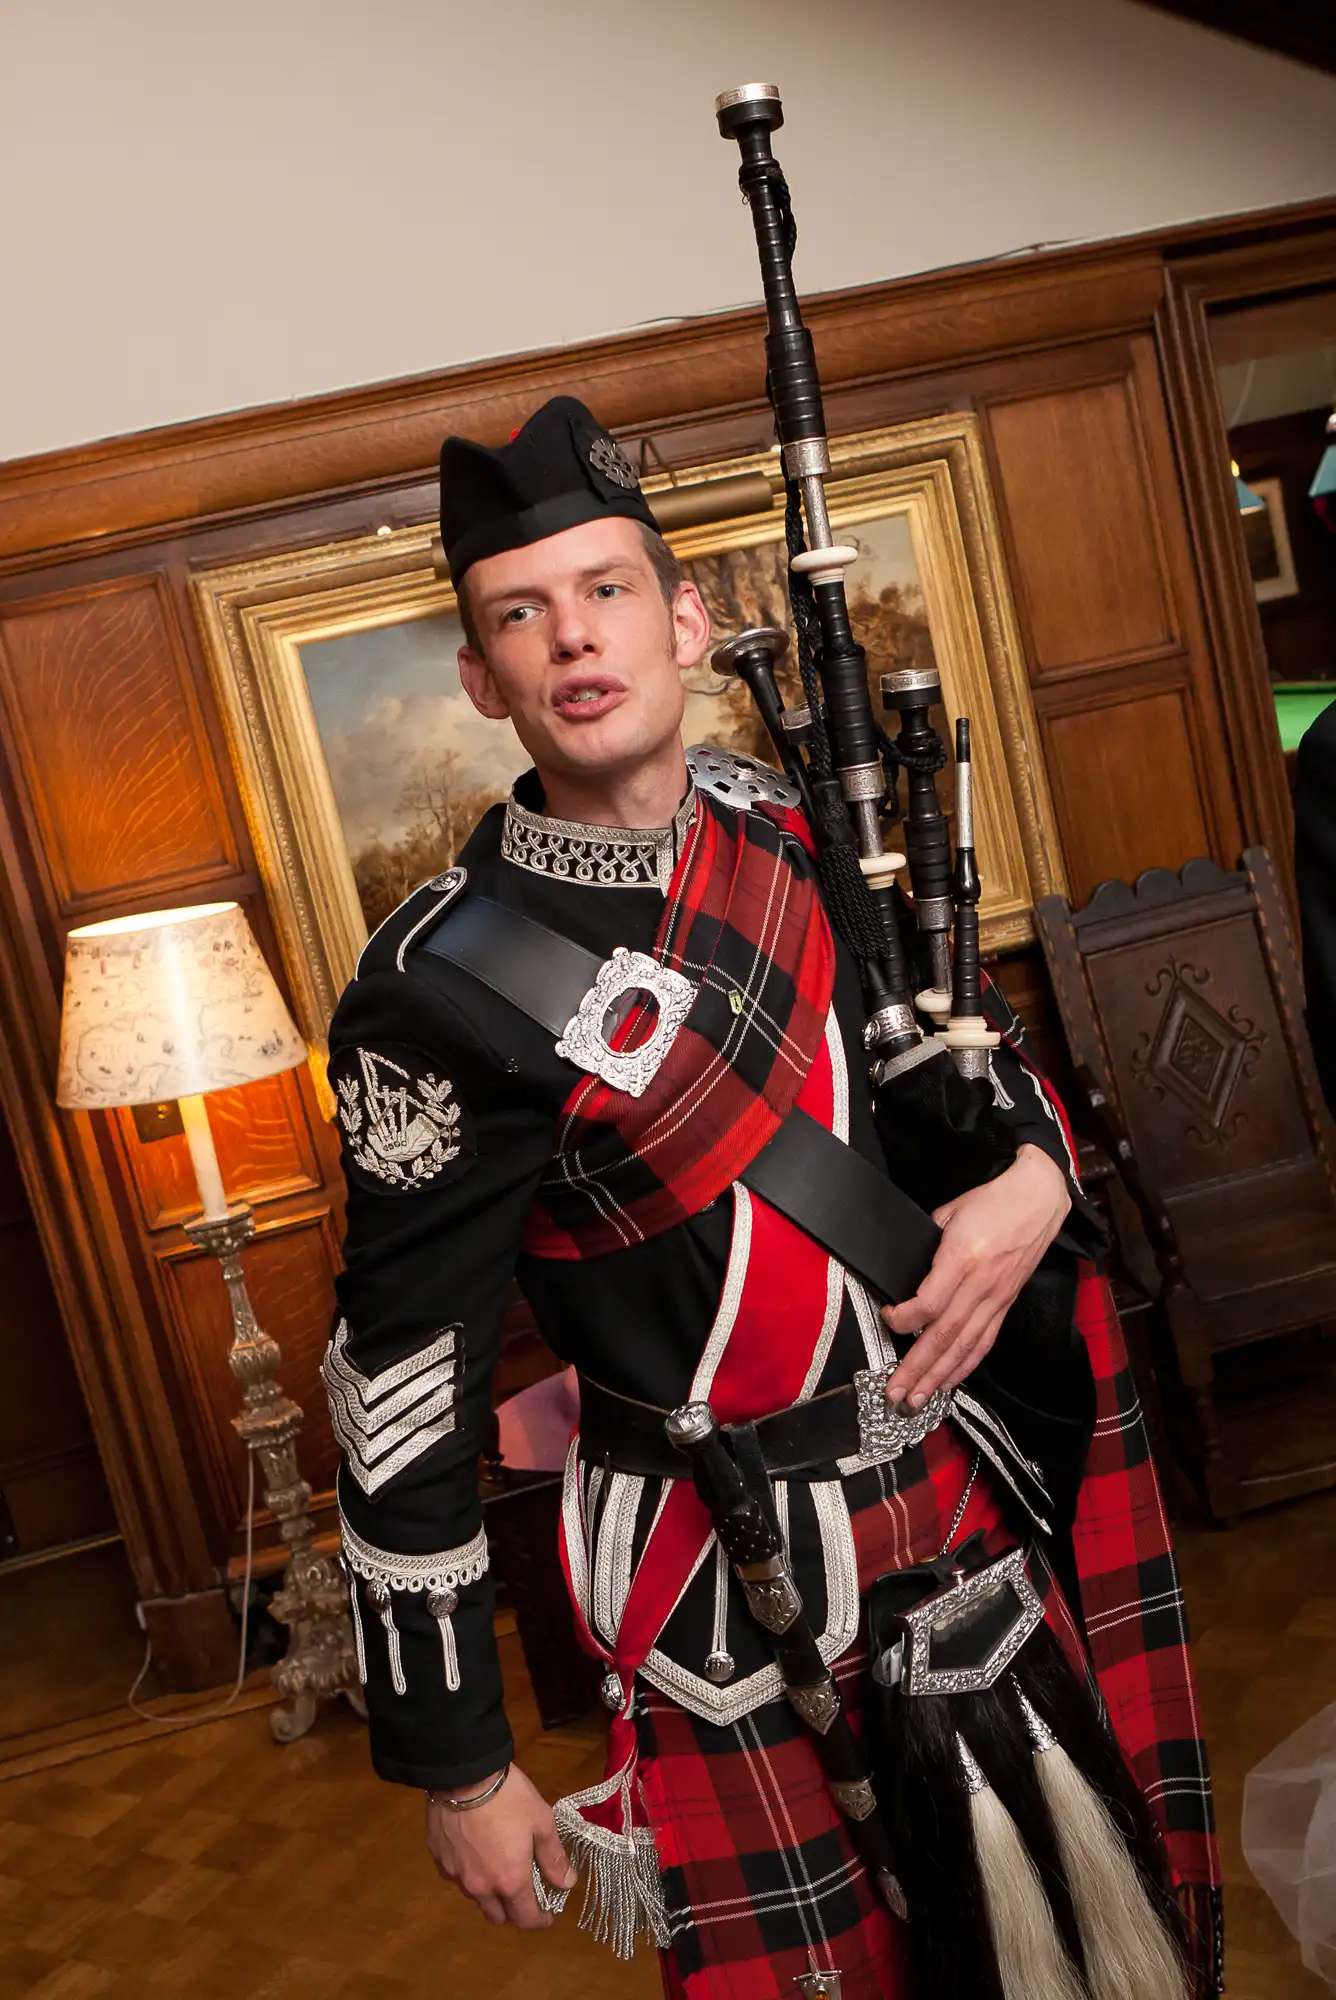 Man in traditional scottish attire, including a kilt and sporran, holding bagpipes, standing in a warmly lit room with vintage decor.